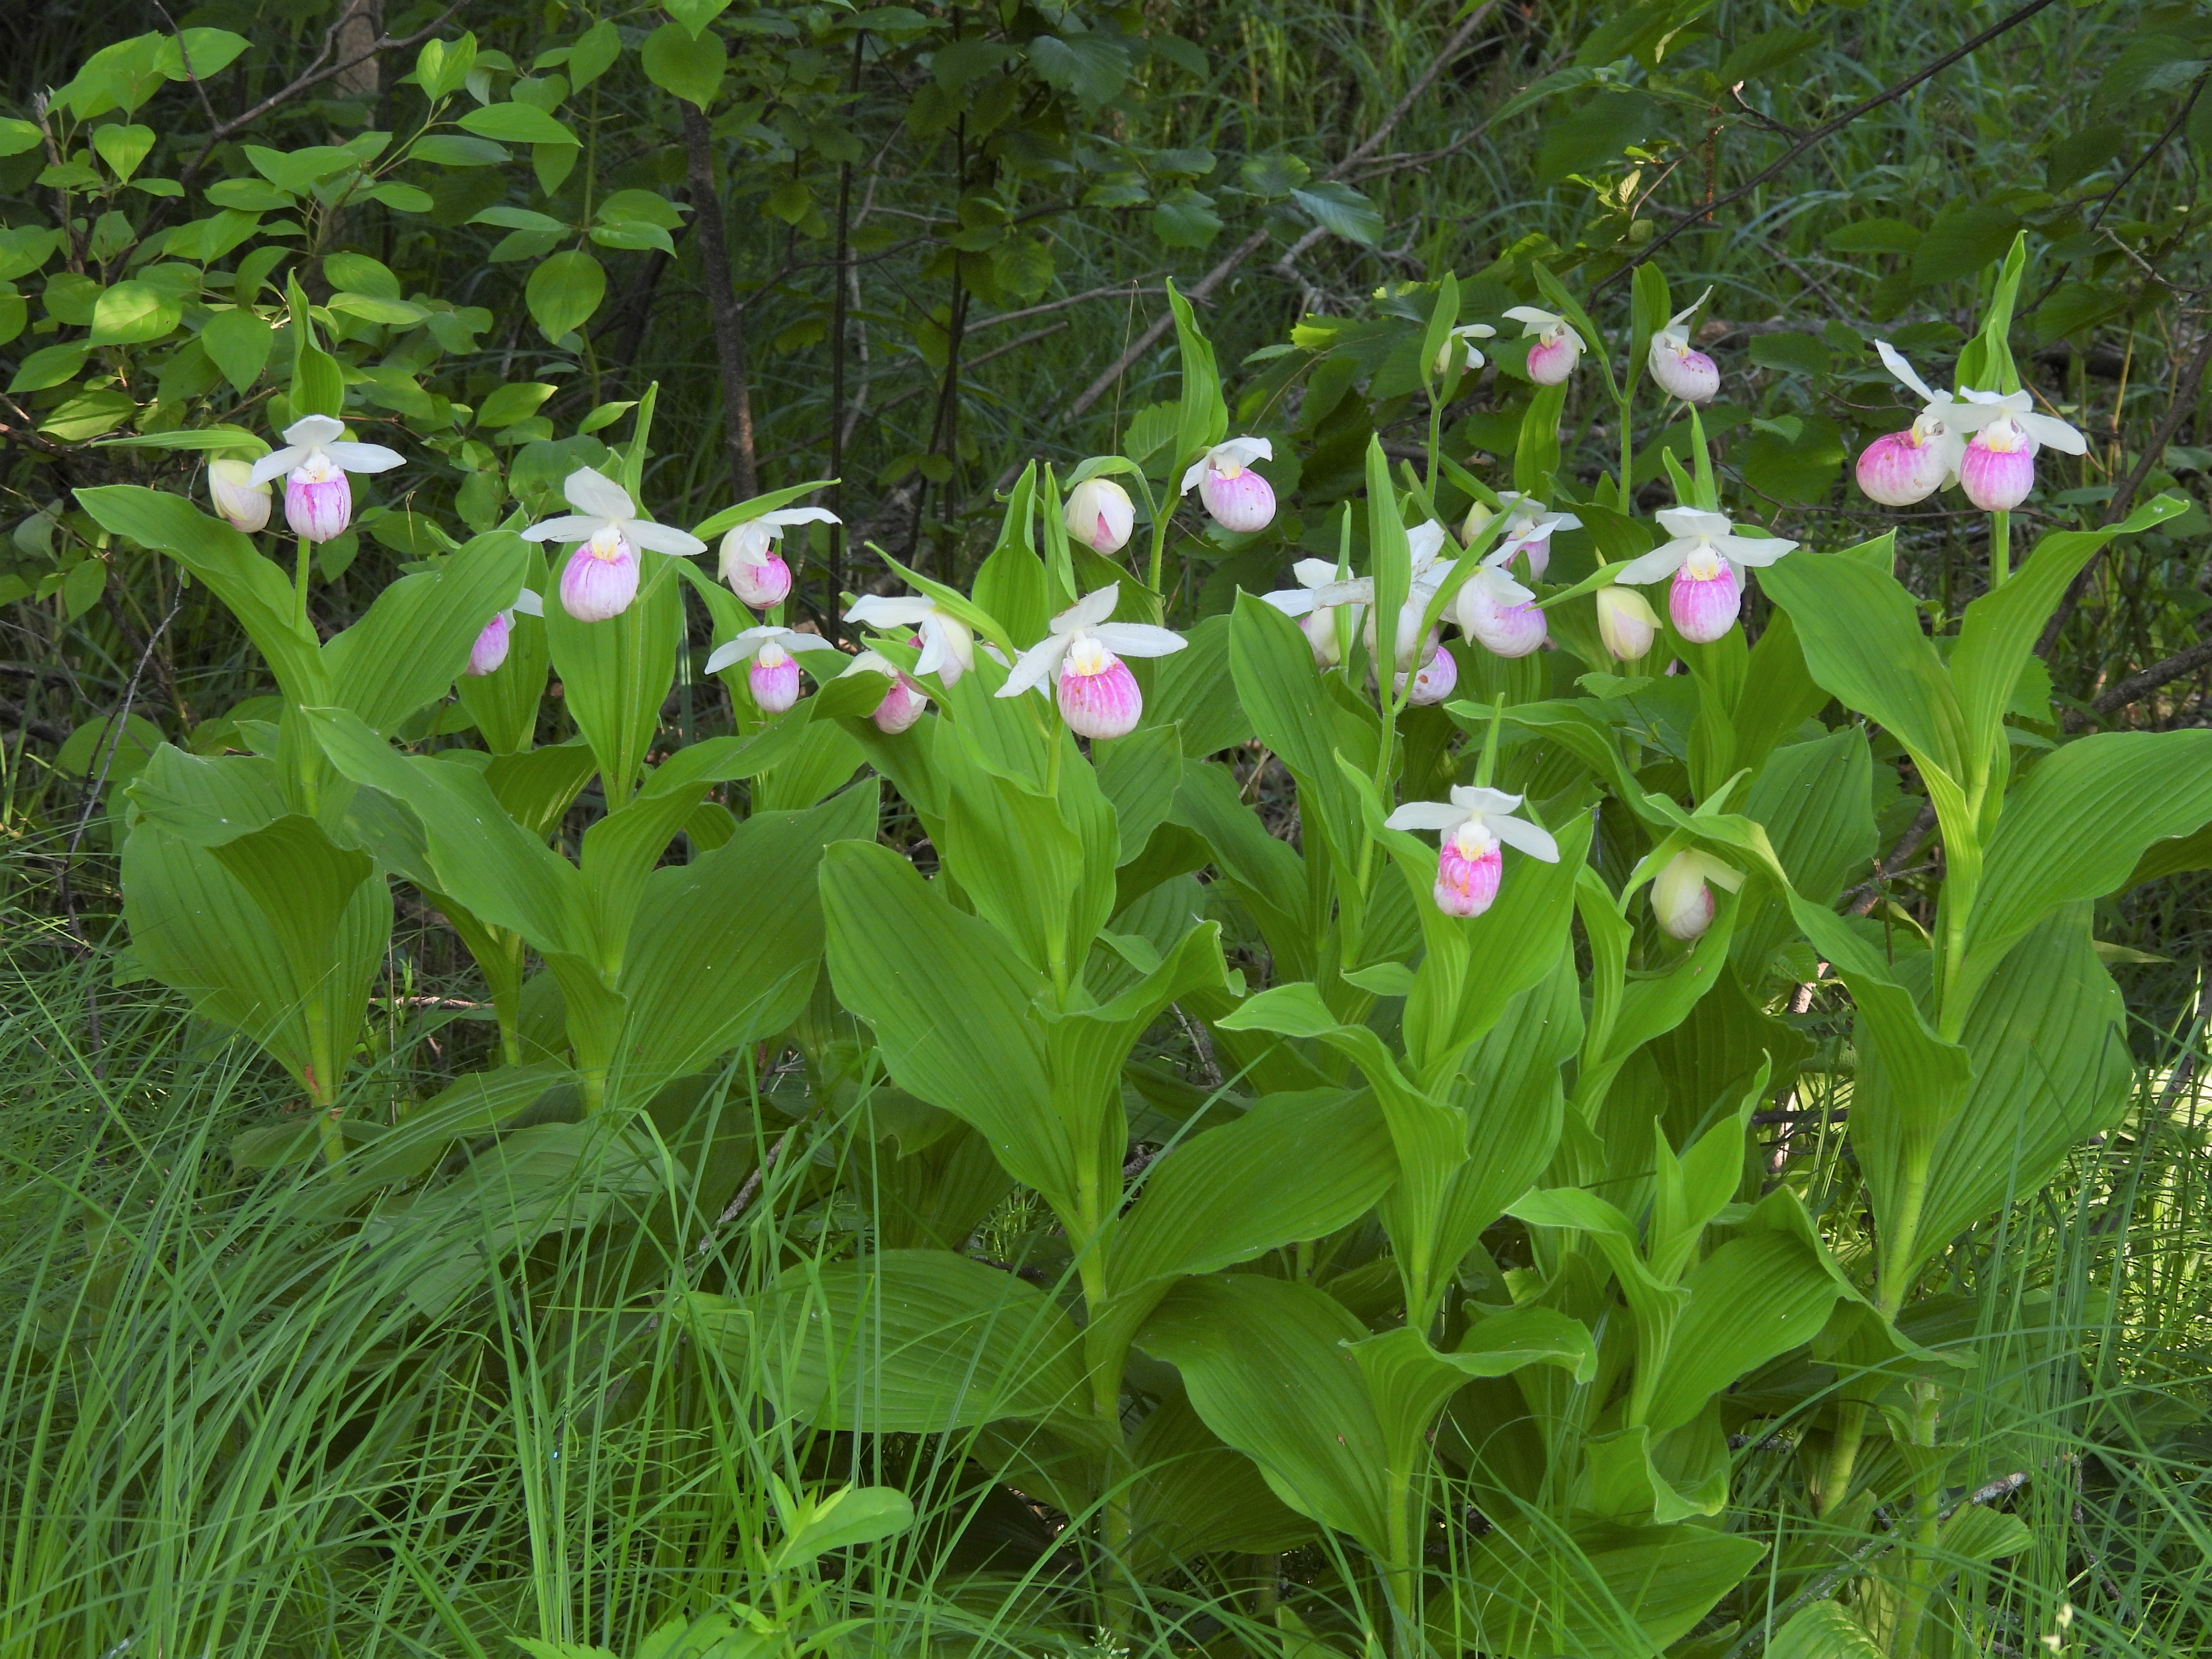 Showy Lady's Slippers in bloom